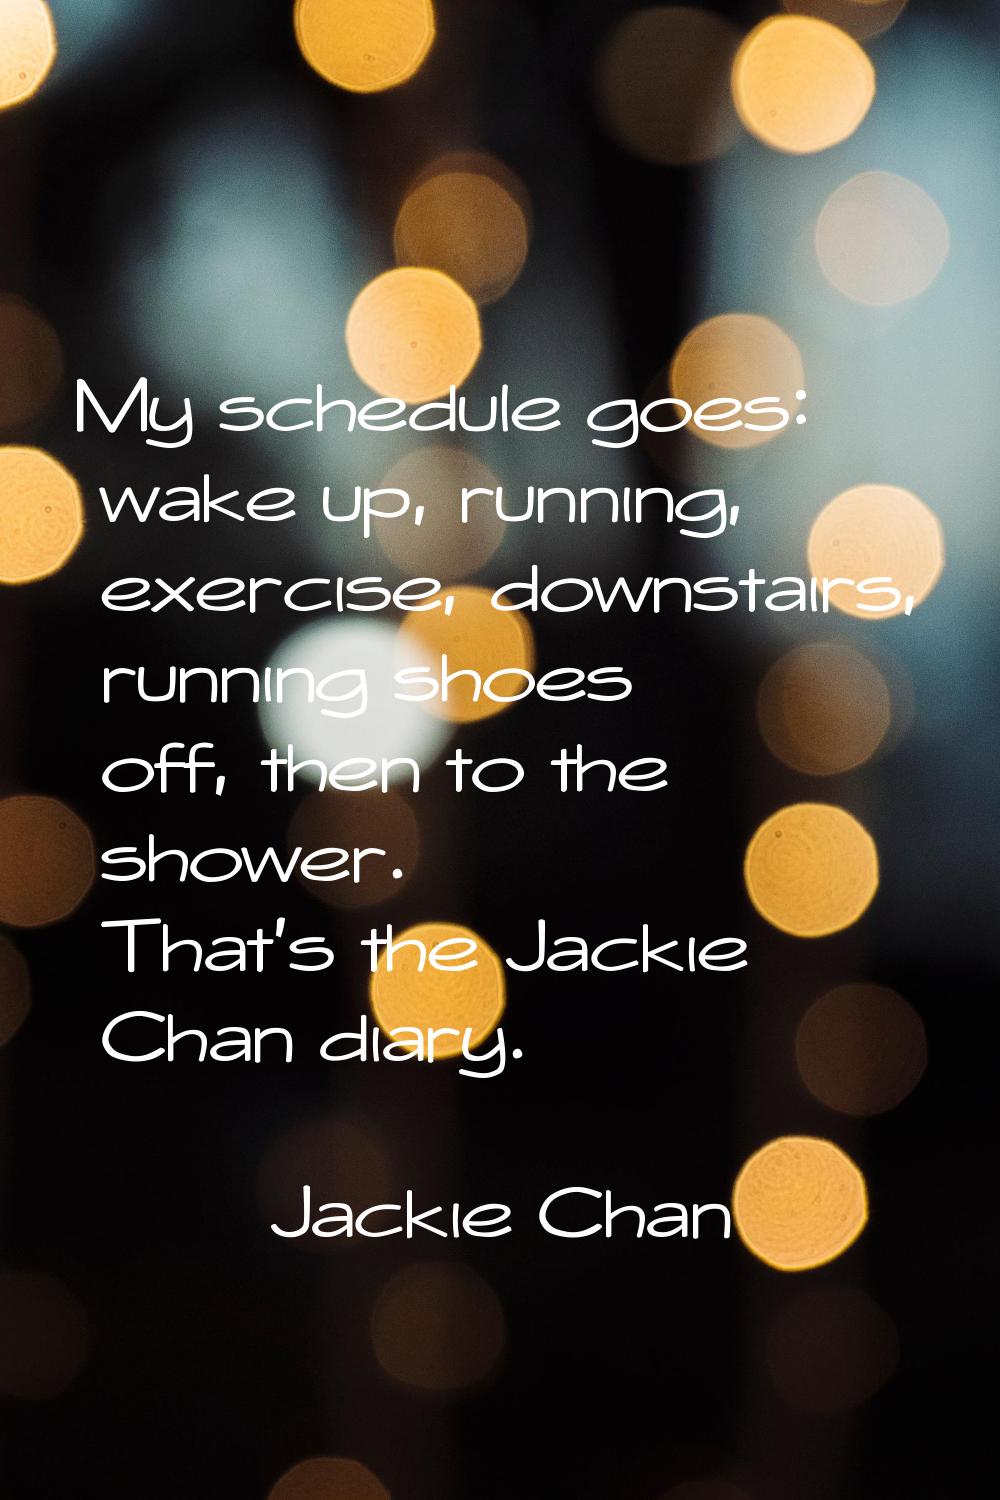 My schedule goes: wake up, running, exercise, downstairs, running shoes off, then to the shower. Th